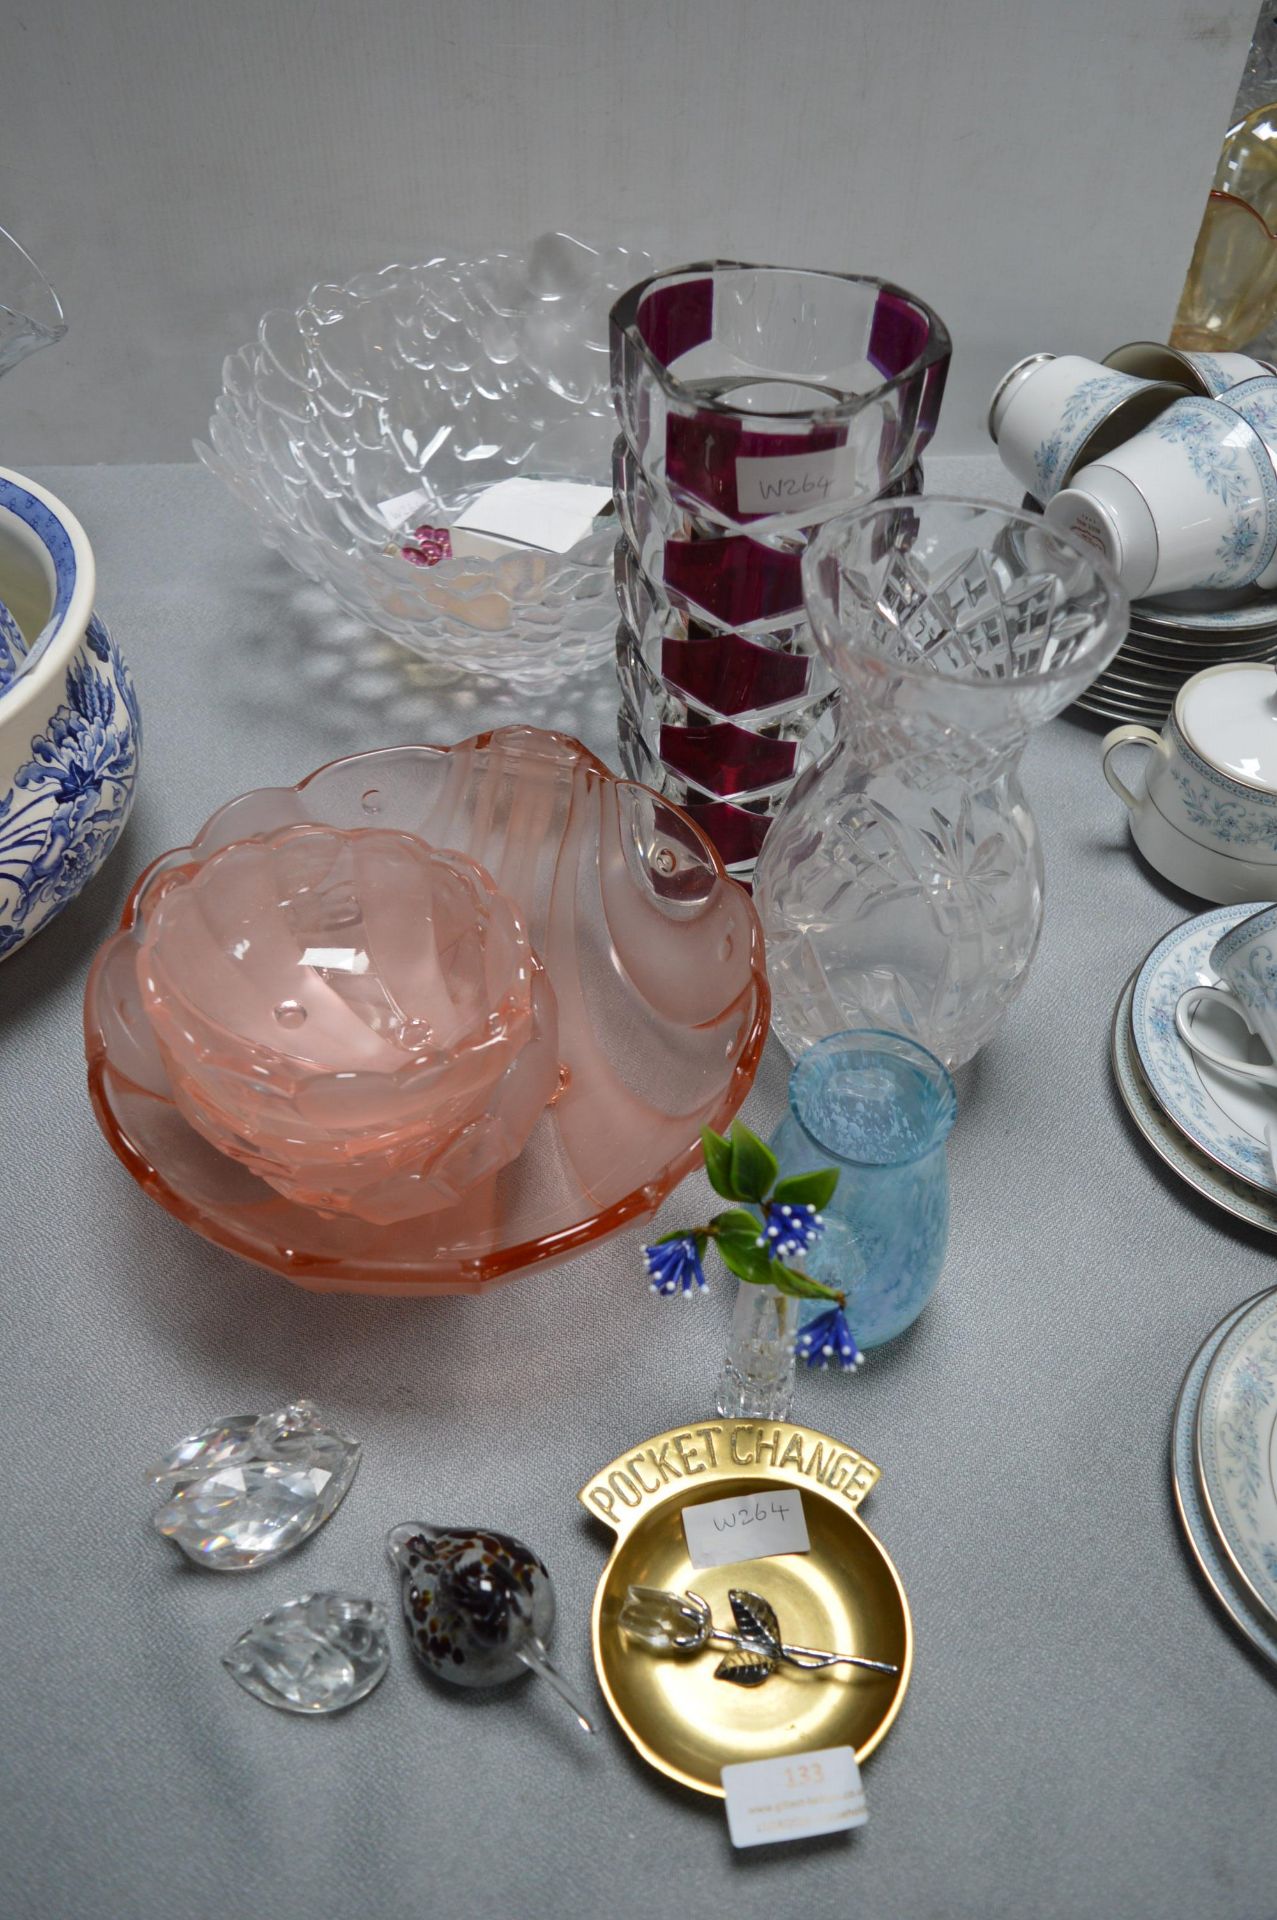 Glass Vases, Dishes, and Birds etc.